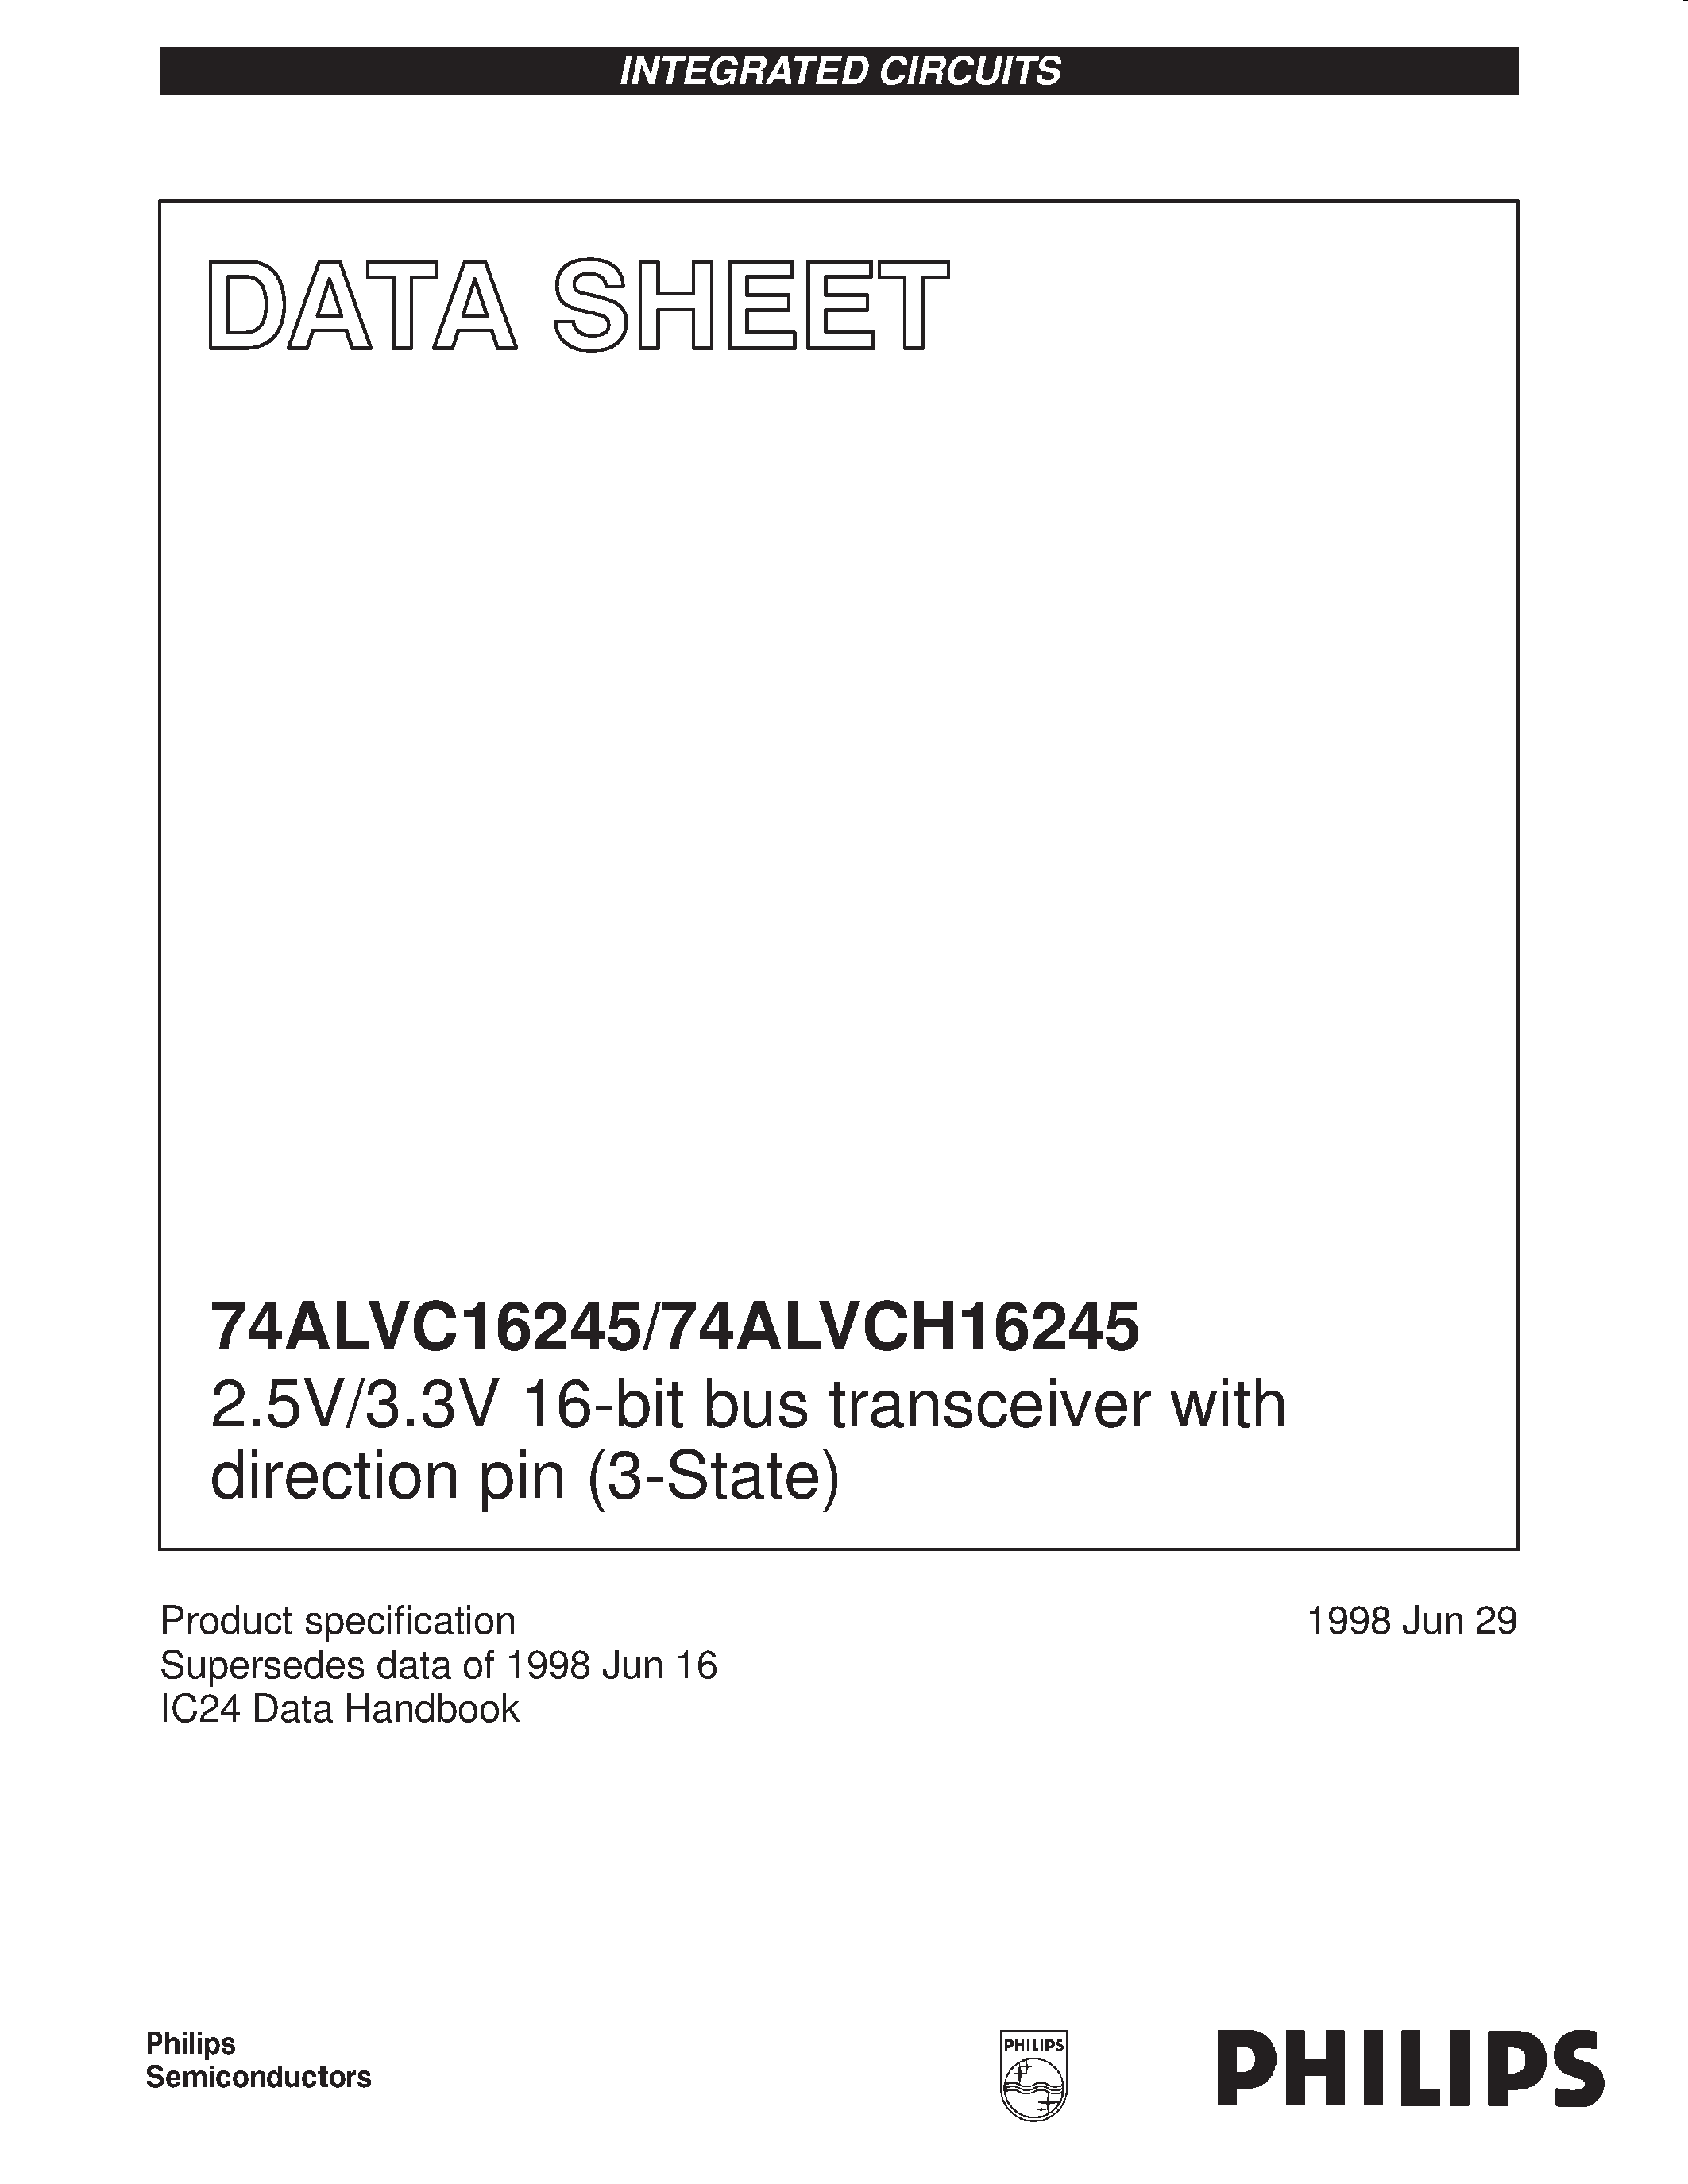 Datasheet 74ALVCH16245DL - 2.5V/3.3V 16-bit bus transceiver with direction pin 3-State page 1